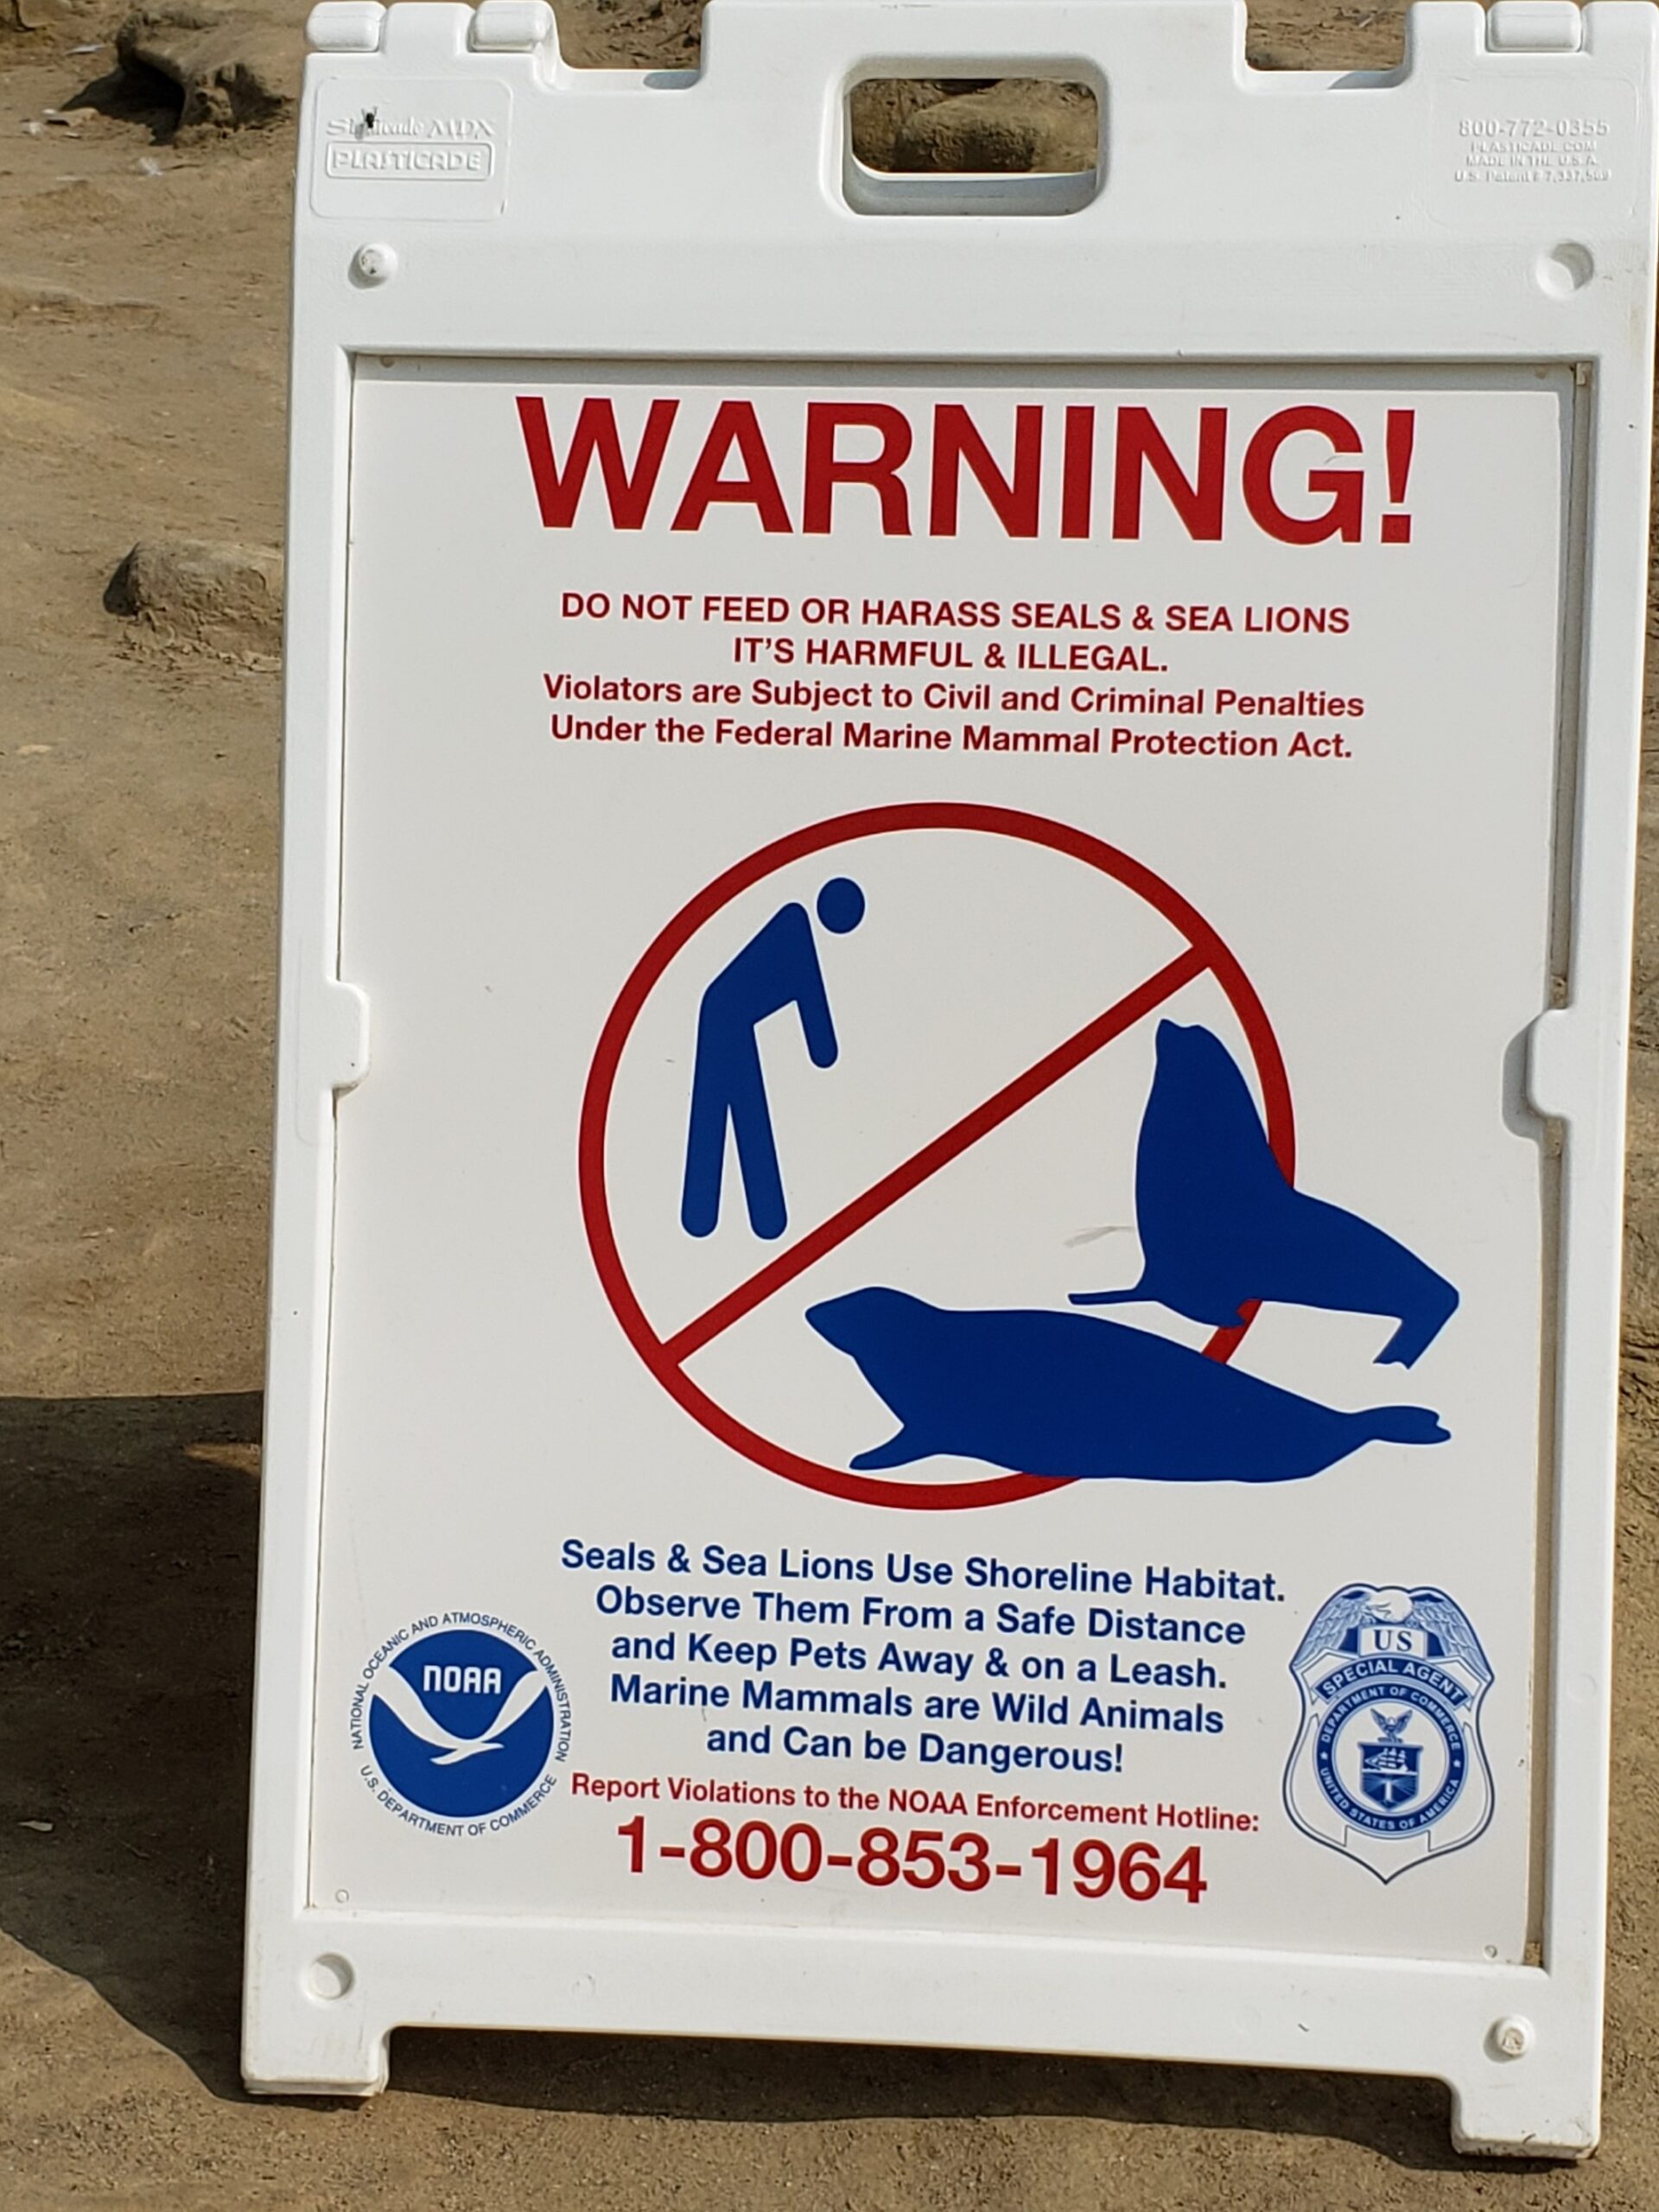 San Diego Sea Lions and Seals: Where To Safely and Responsibly See Them